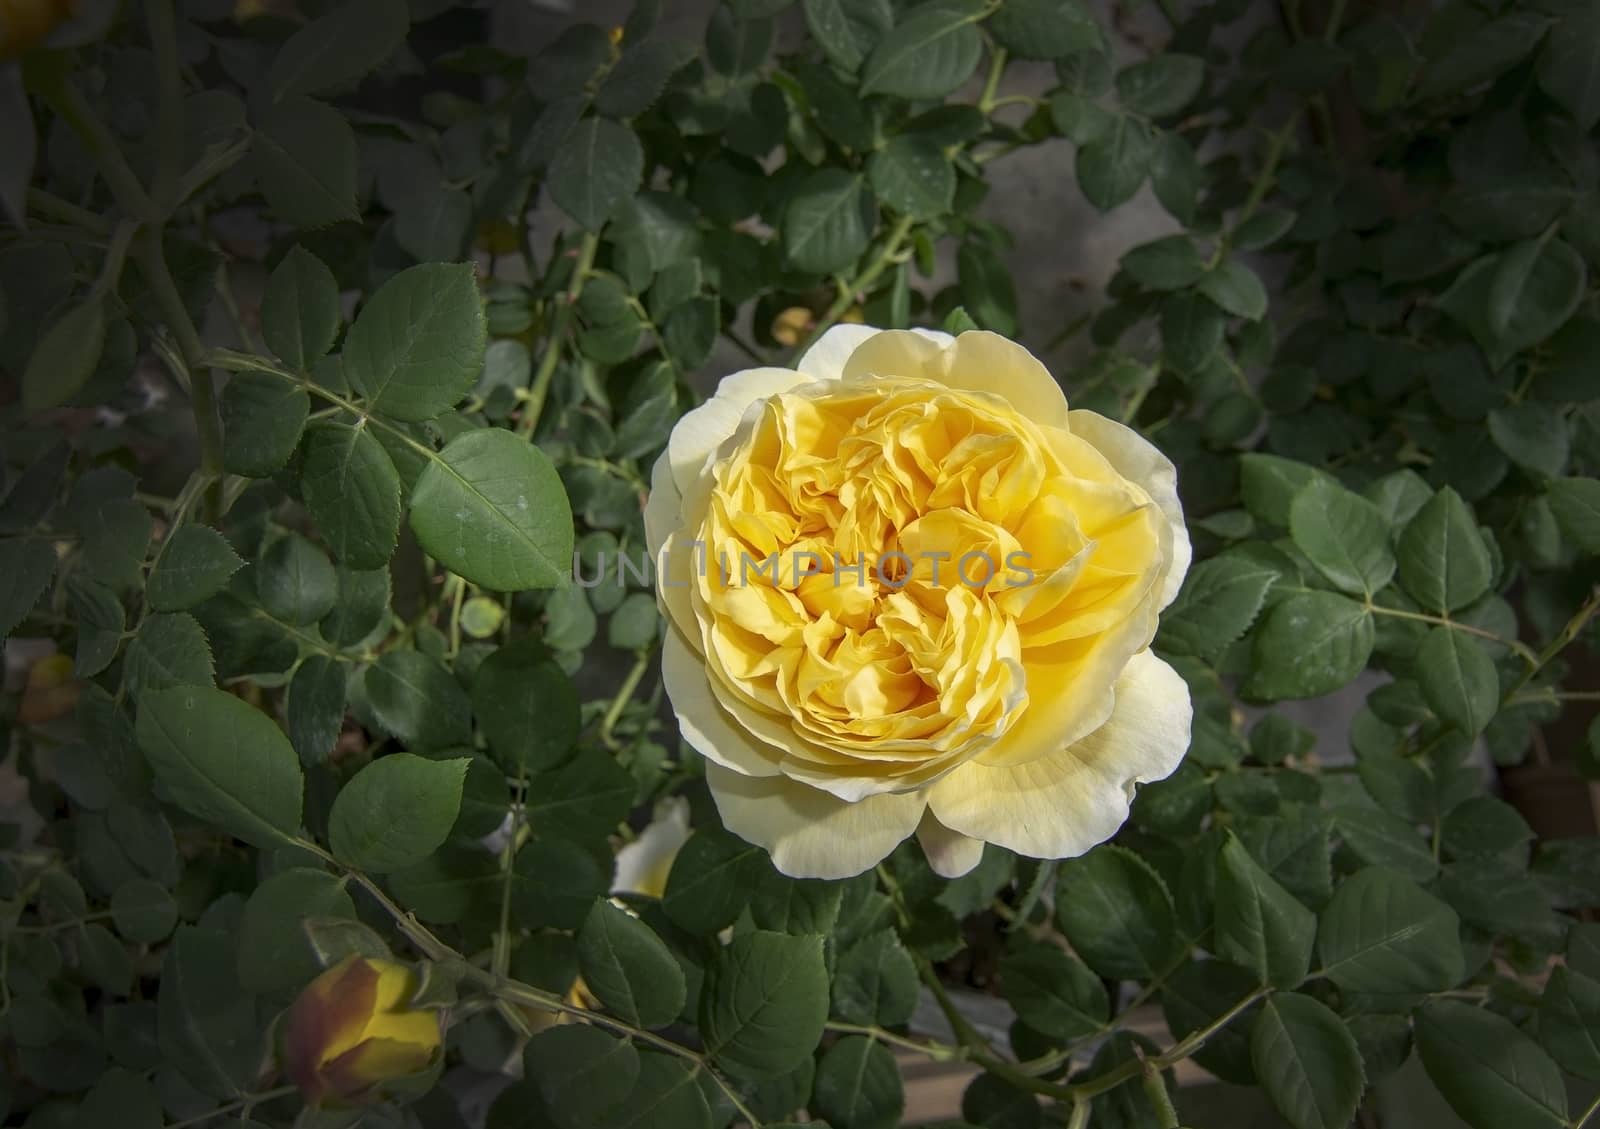 Gorgeous double yellow rose flowers by ArtesiaWells